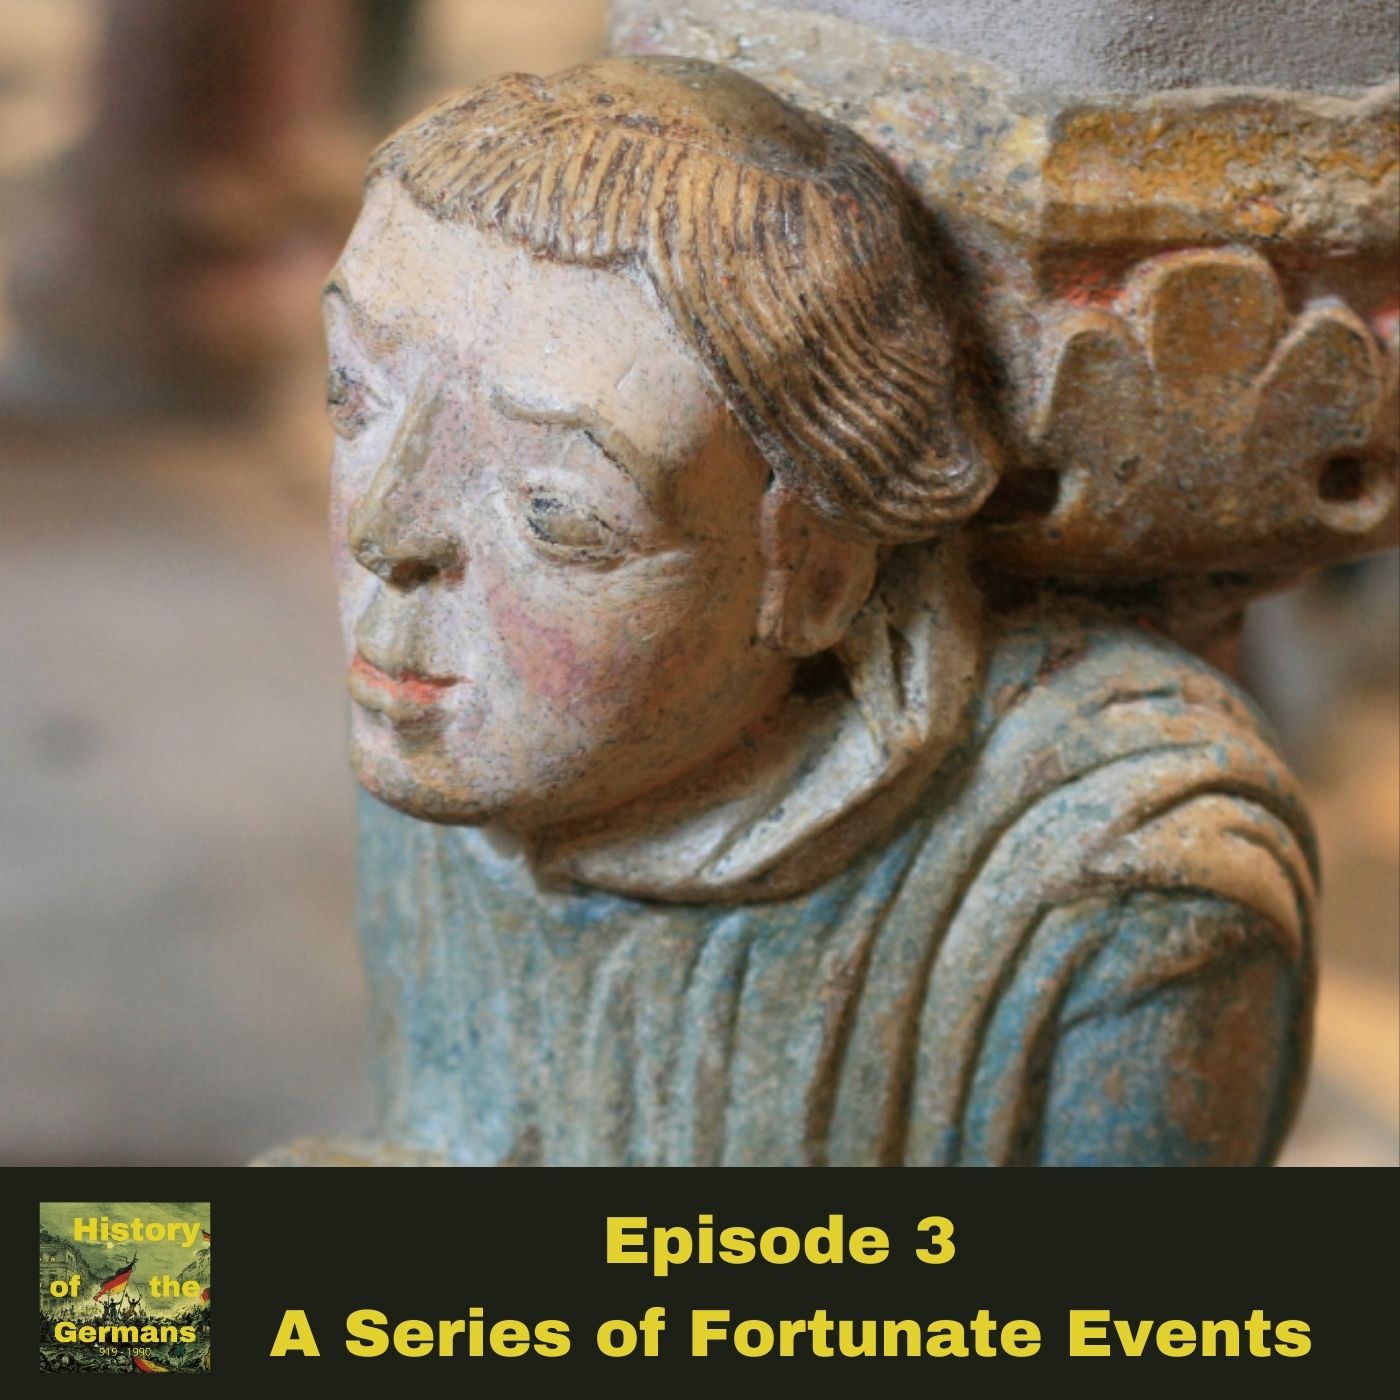 Episode 3 - A Series of Fortunate Events